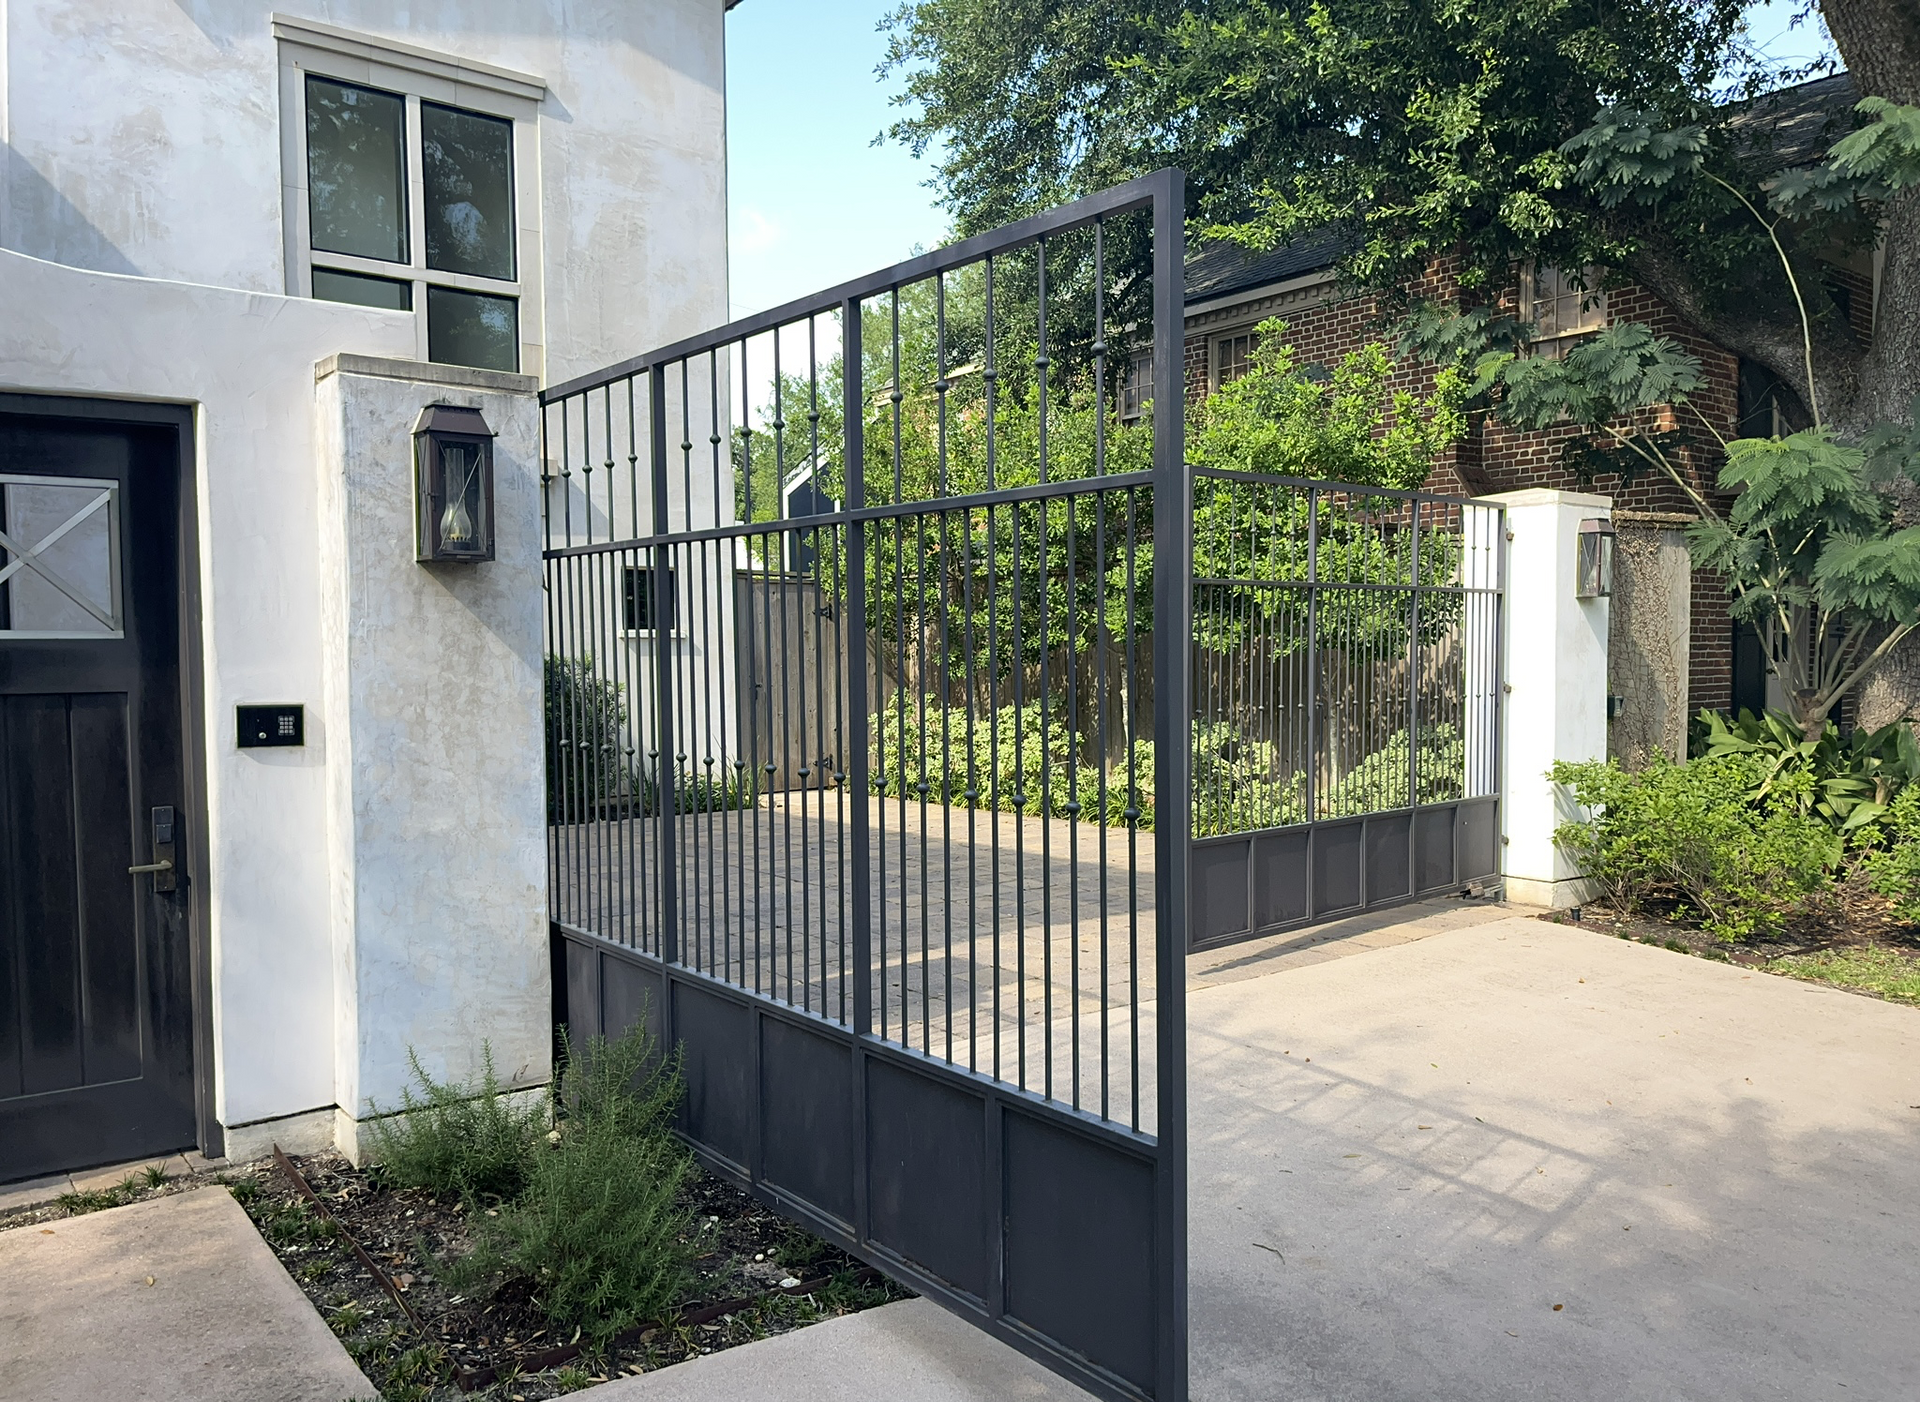 A wrought iron gate with stucco column and keypad remote entry at a home driveway.